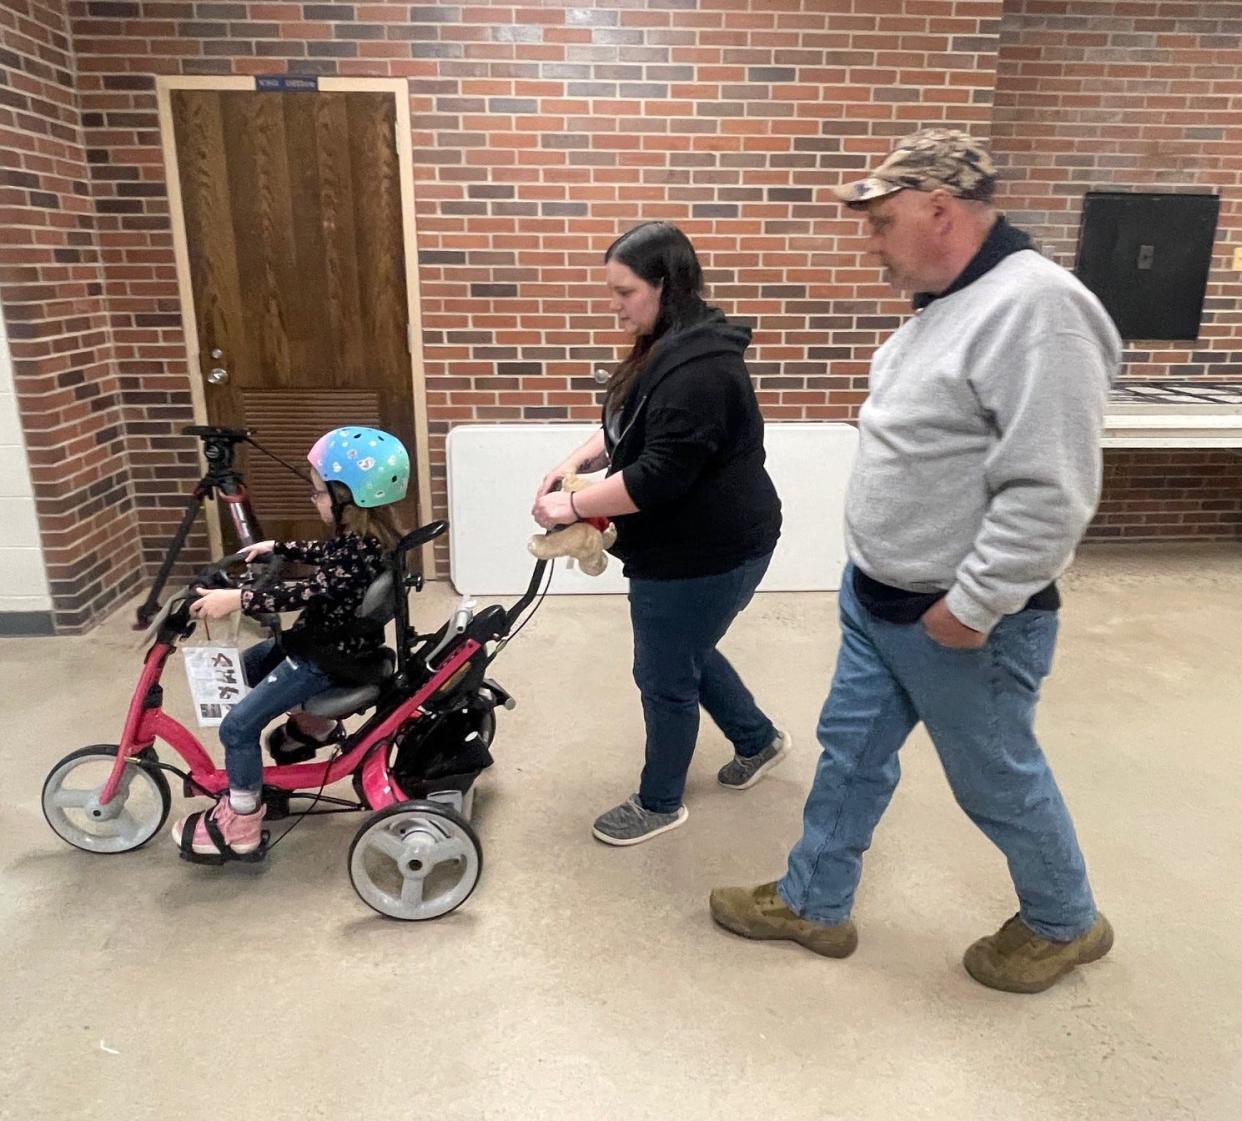 Taylor Ogline pedals her bike down the hallway at the Greater Johnstown Career and Technology Center. Taylor's mom, Kaylee Ogline, and grandfather, Joseph Schuck, of Hollsopple, are walking behind her.